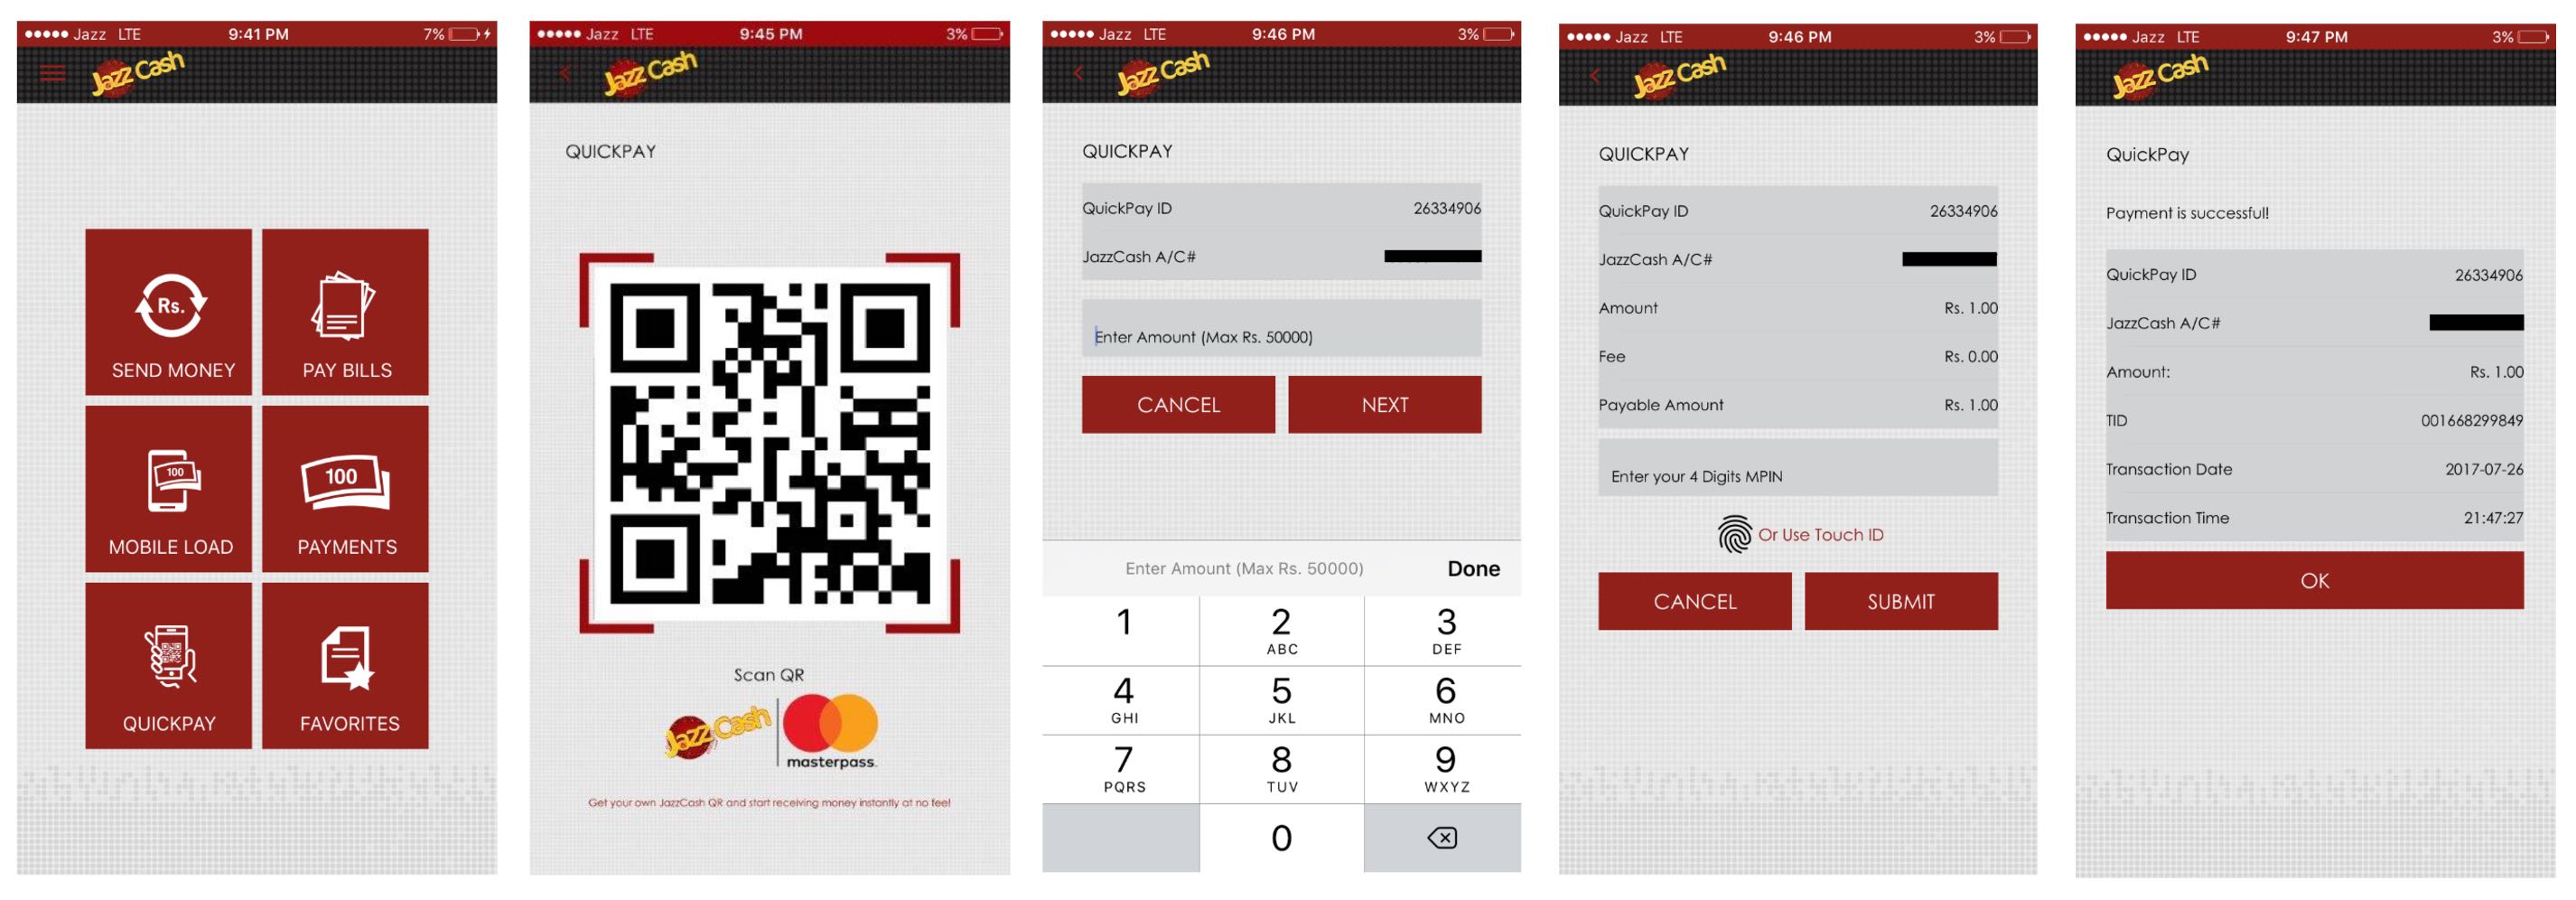 What Is a QR Code and How Does It Work? - Small Business ...